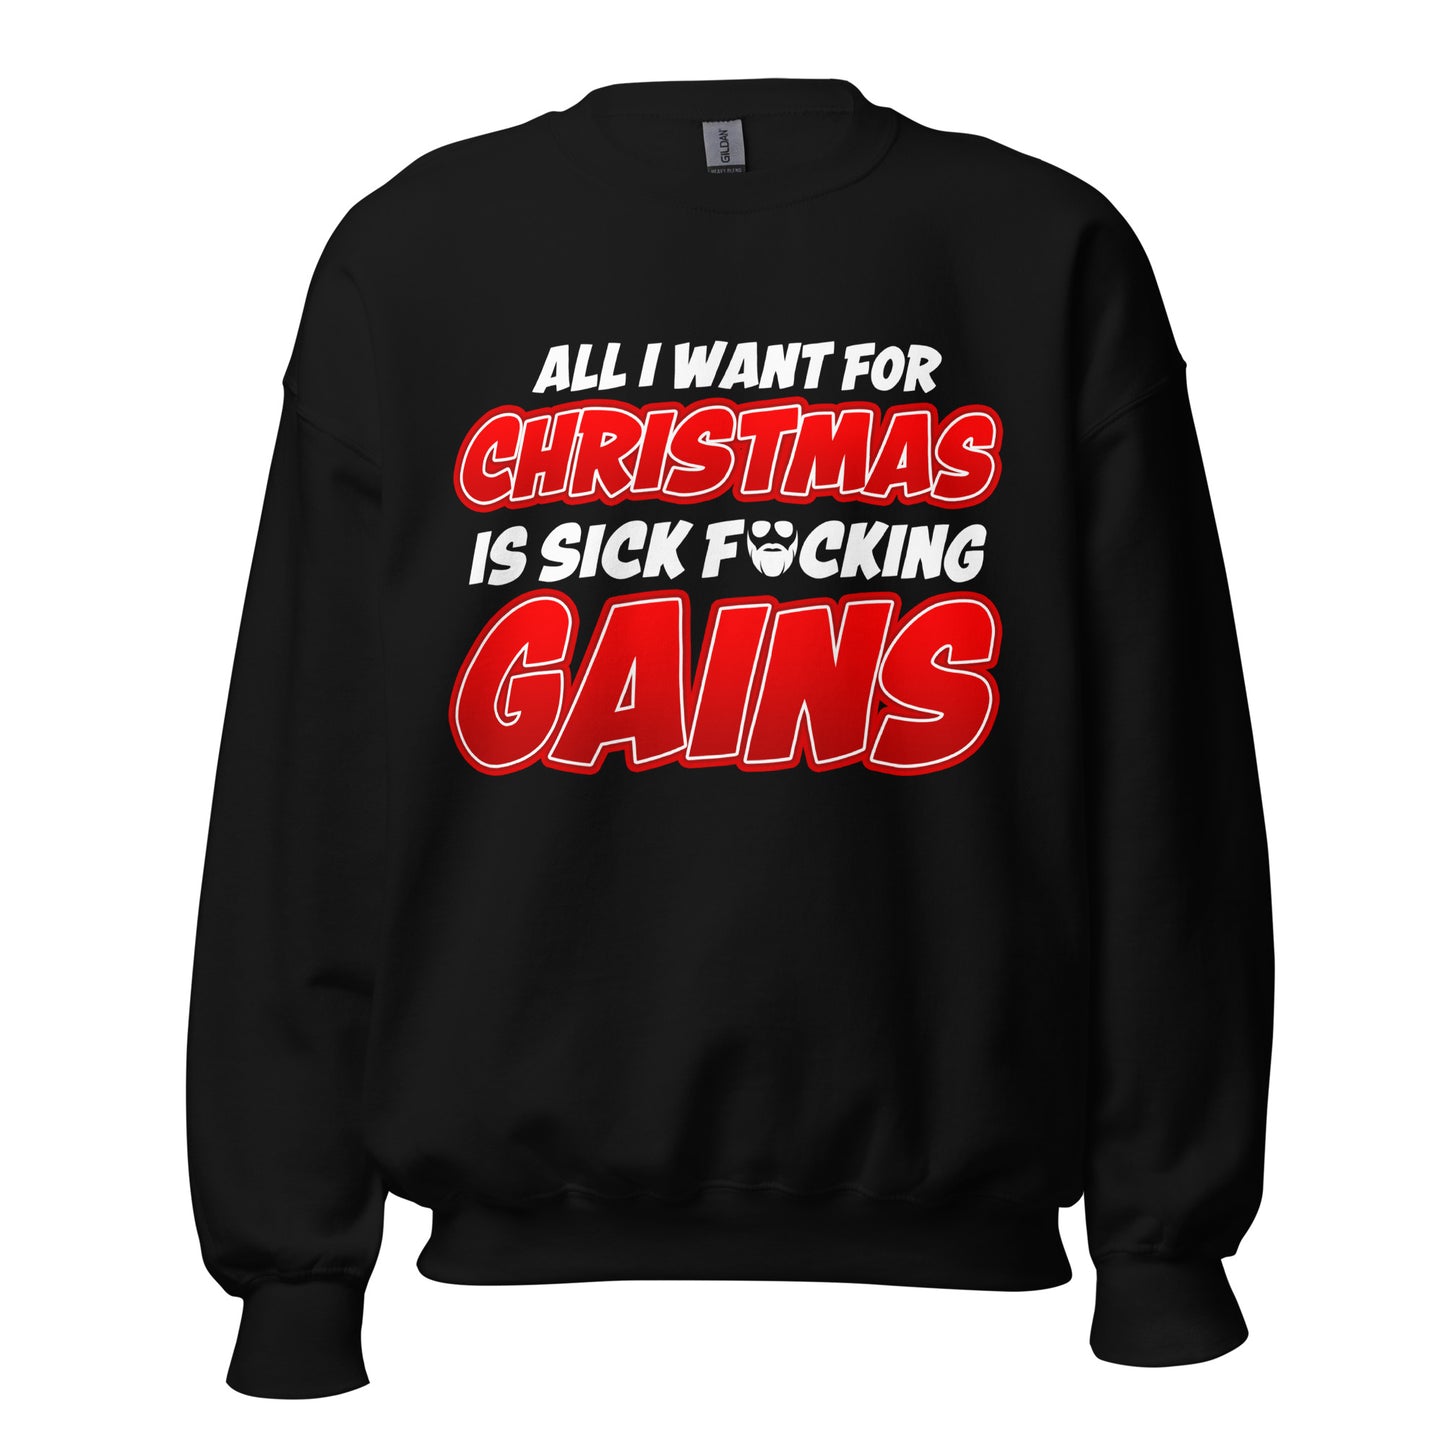 All I Want For Chirstmas Is Sick F*cking Gains Sweatshirt